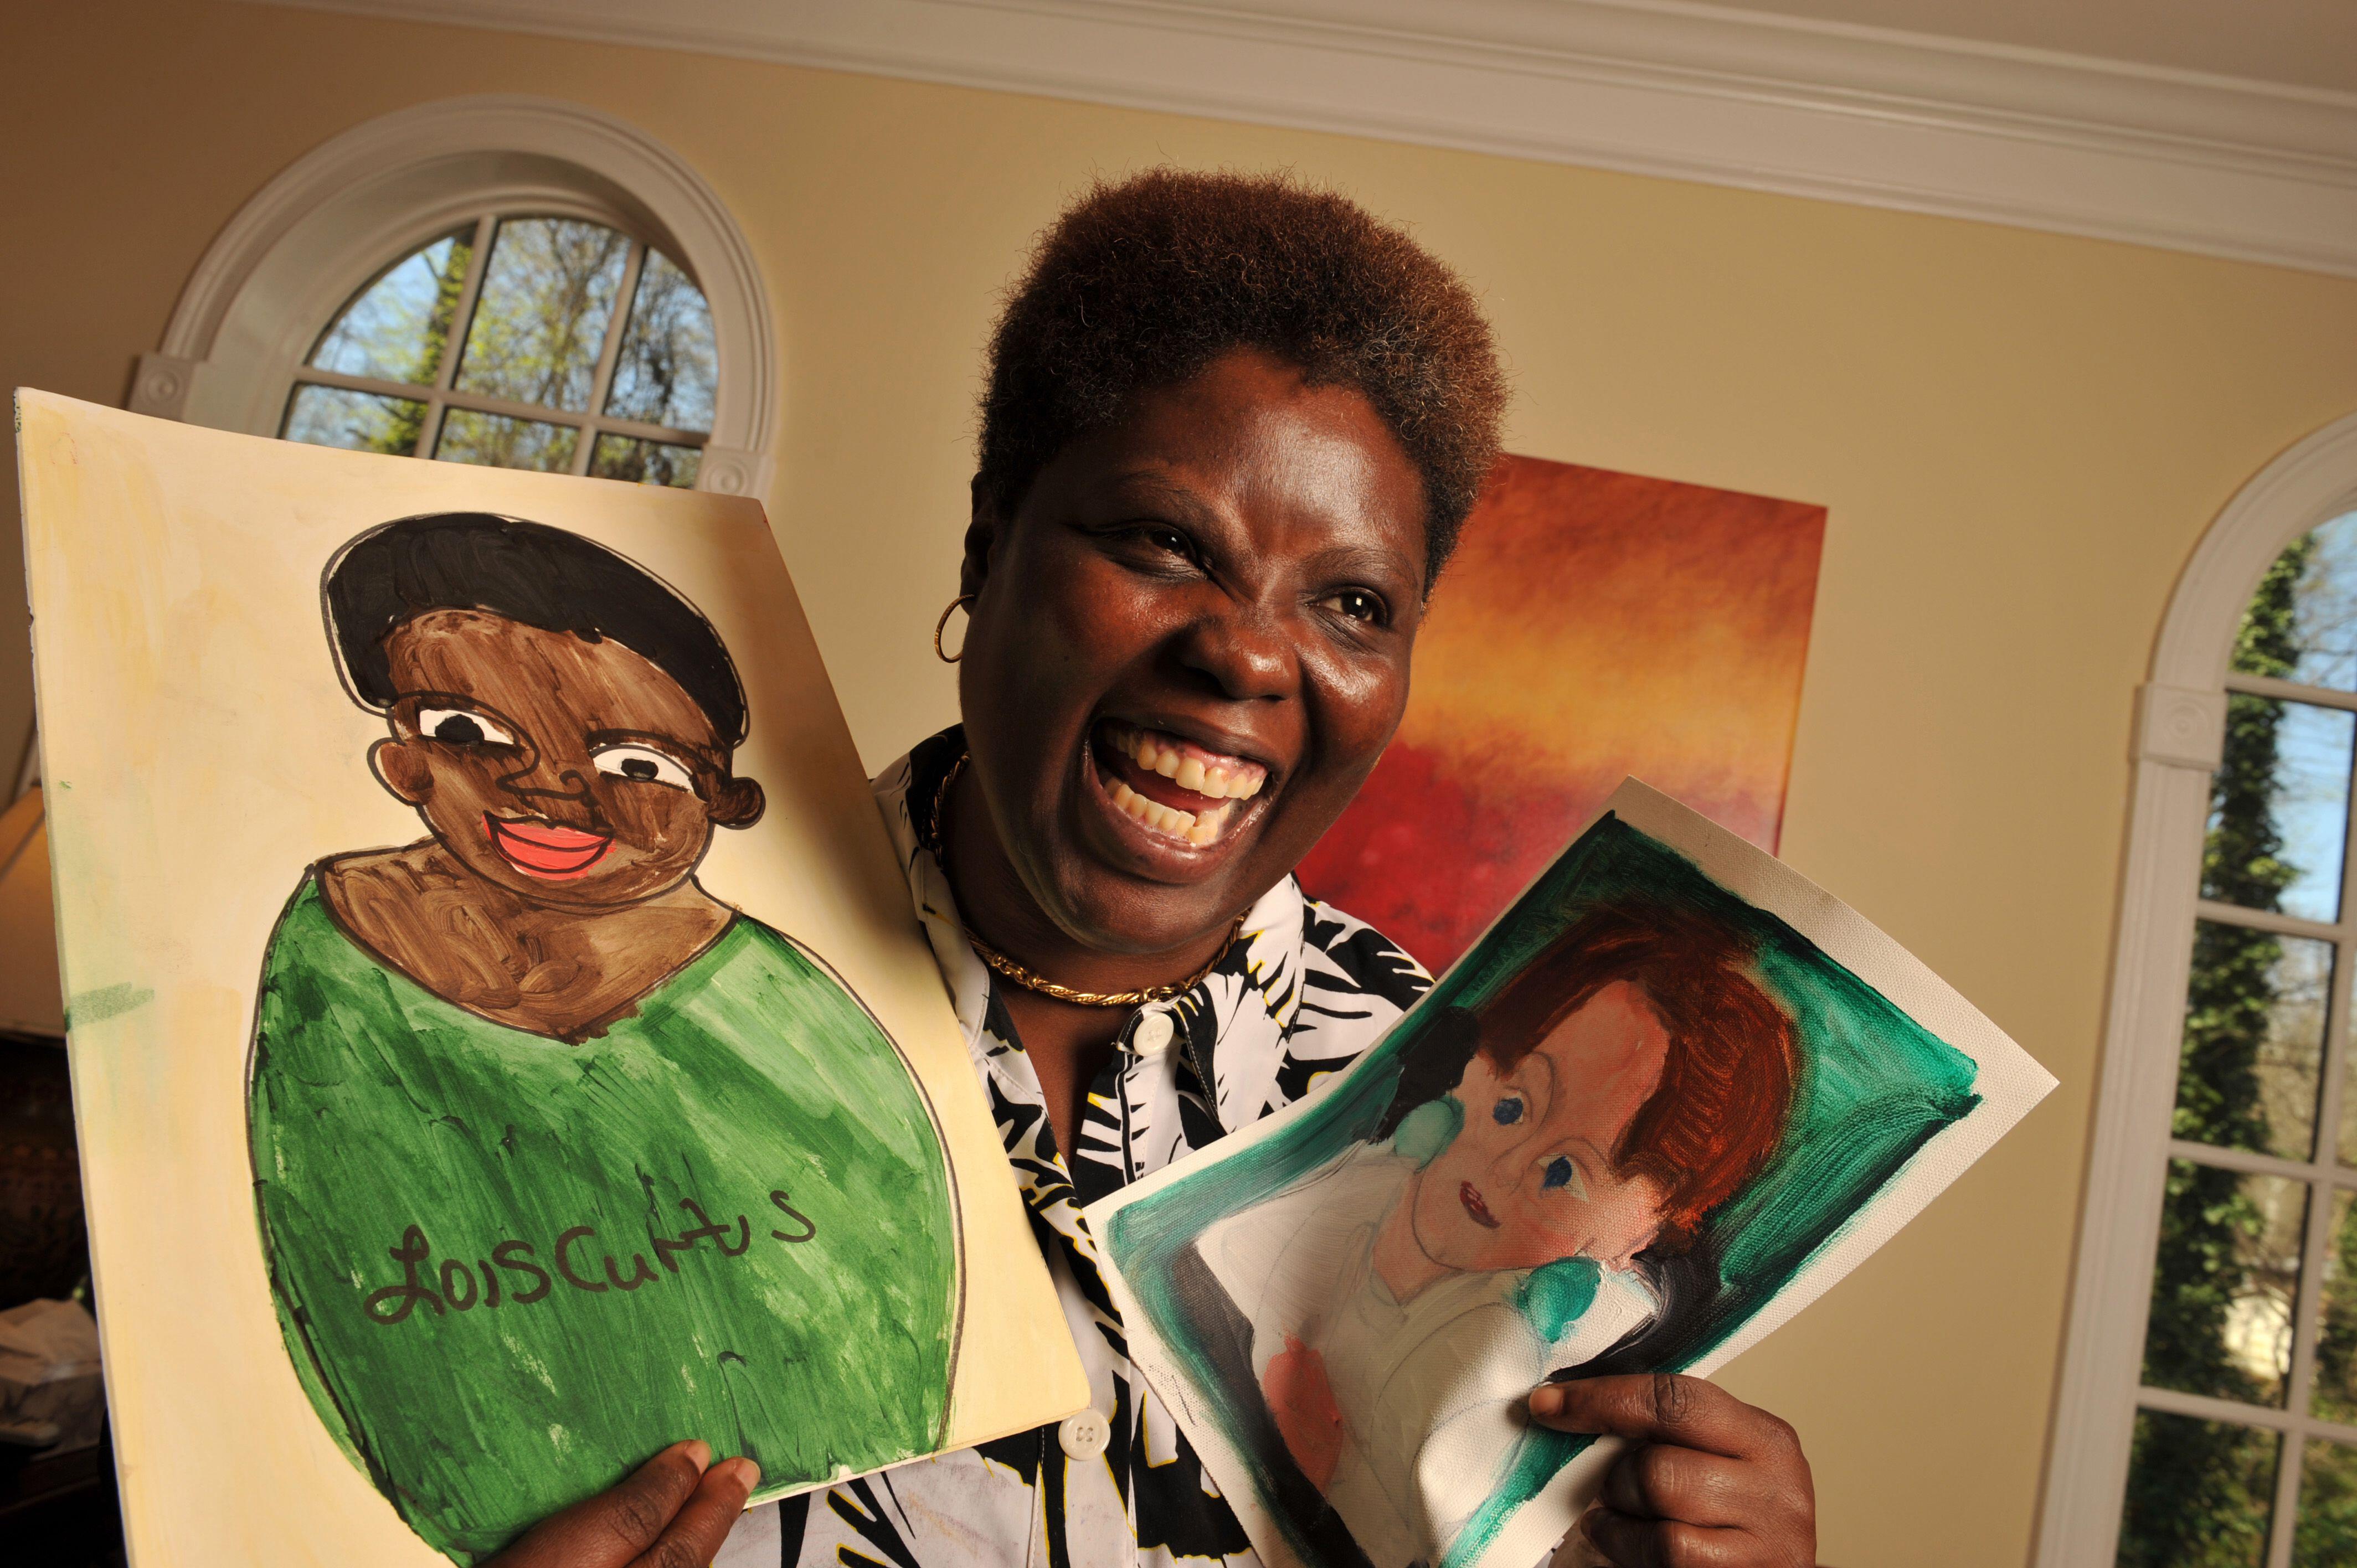 A picture of Lois Curtis smiling with two drawings in her hand